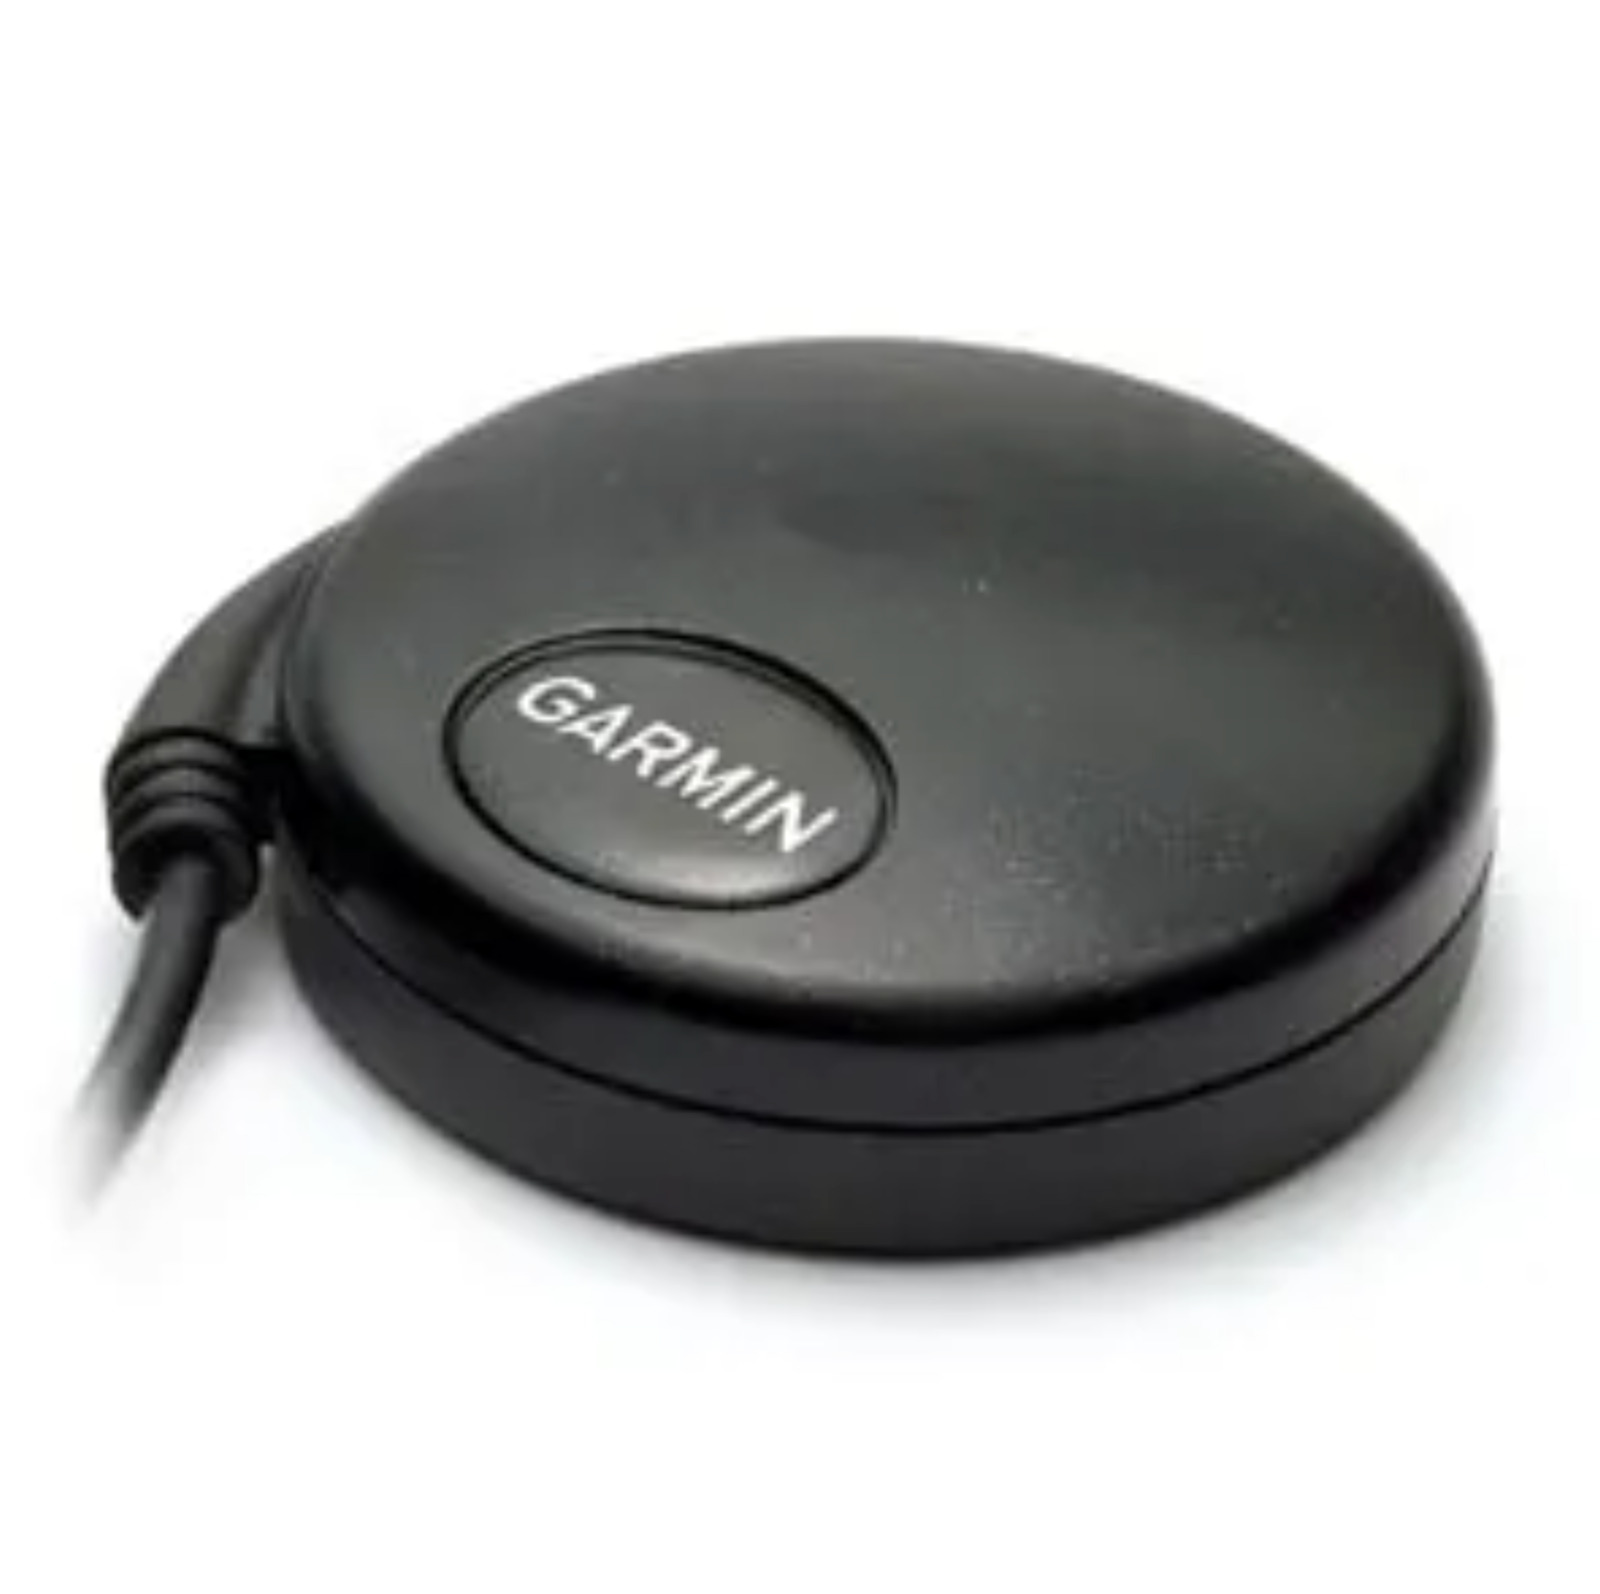 Garmin GPS 18x GPS Puck Receiver with USB Connection 010-00321-31 - $135.99